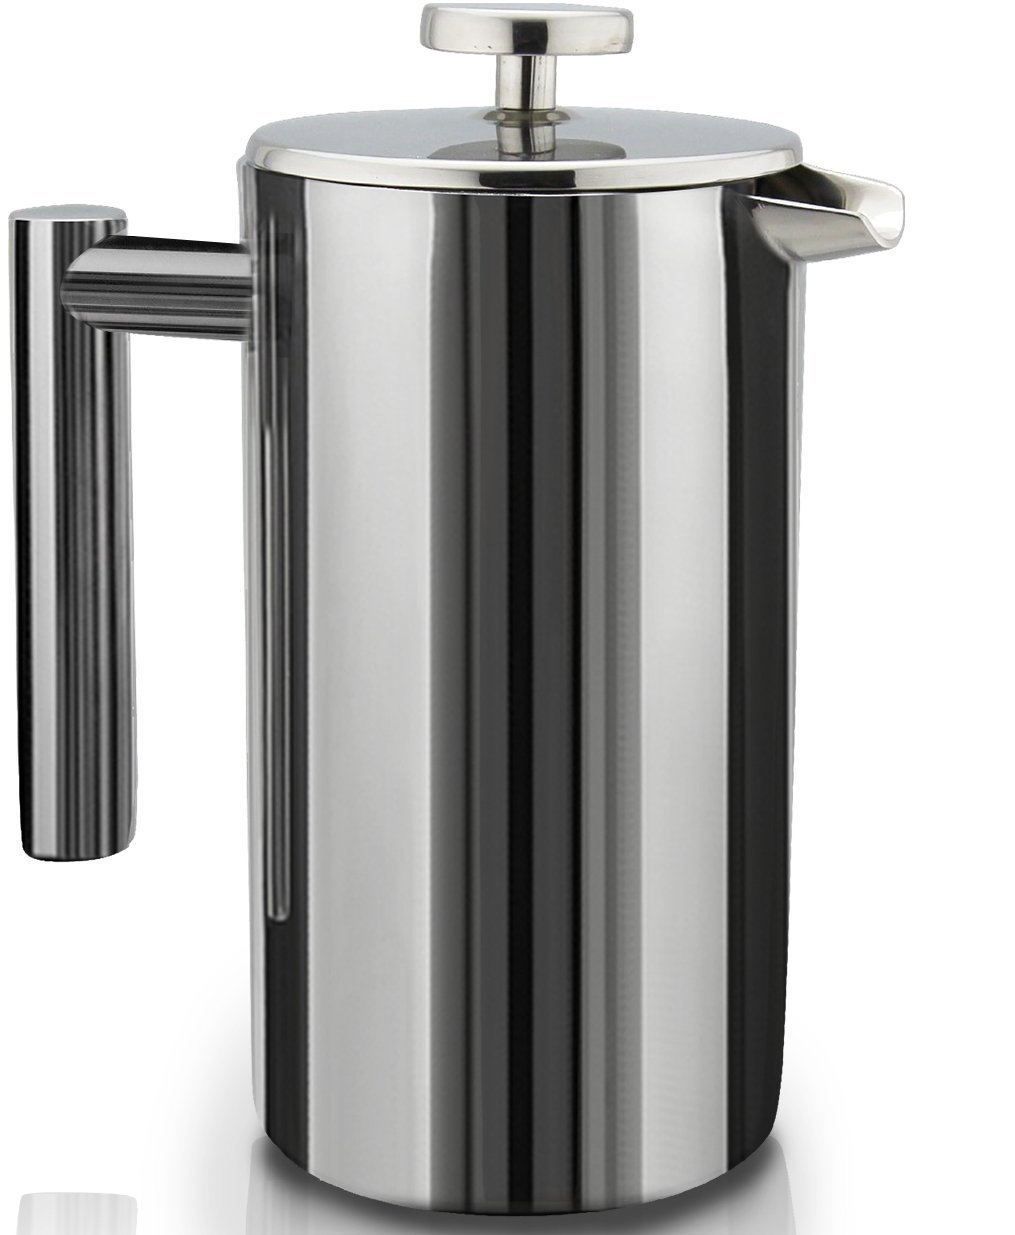 SterlingPro Double Wall Stainless Steel French Coffee Press Maker, 1 Liter